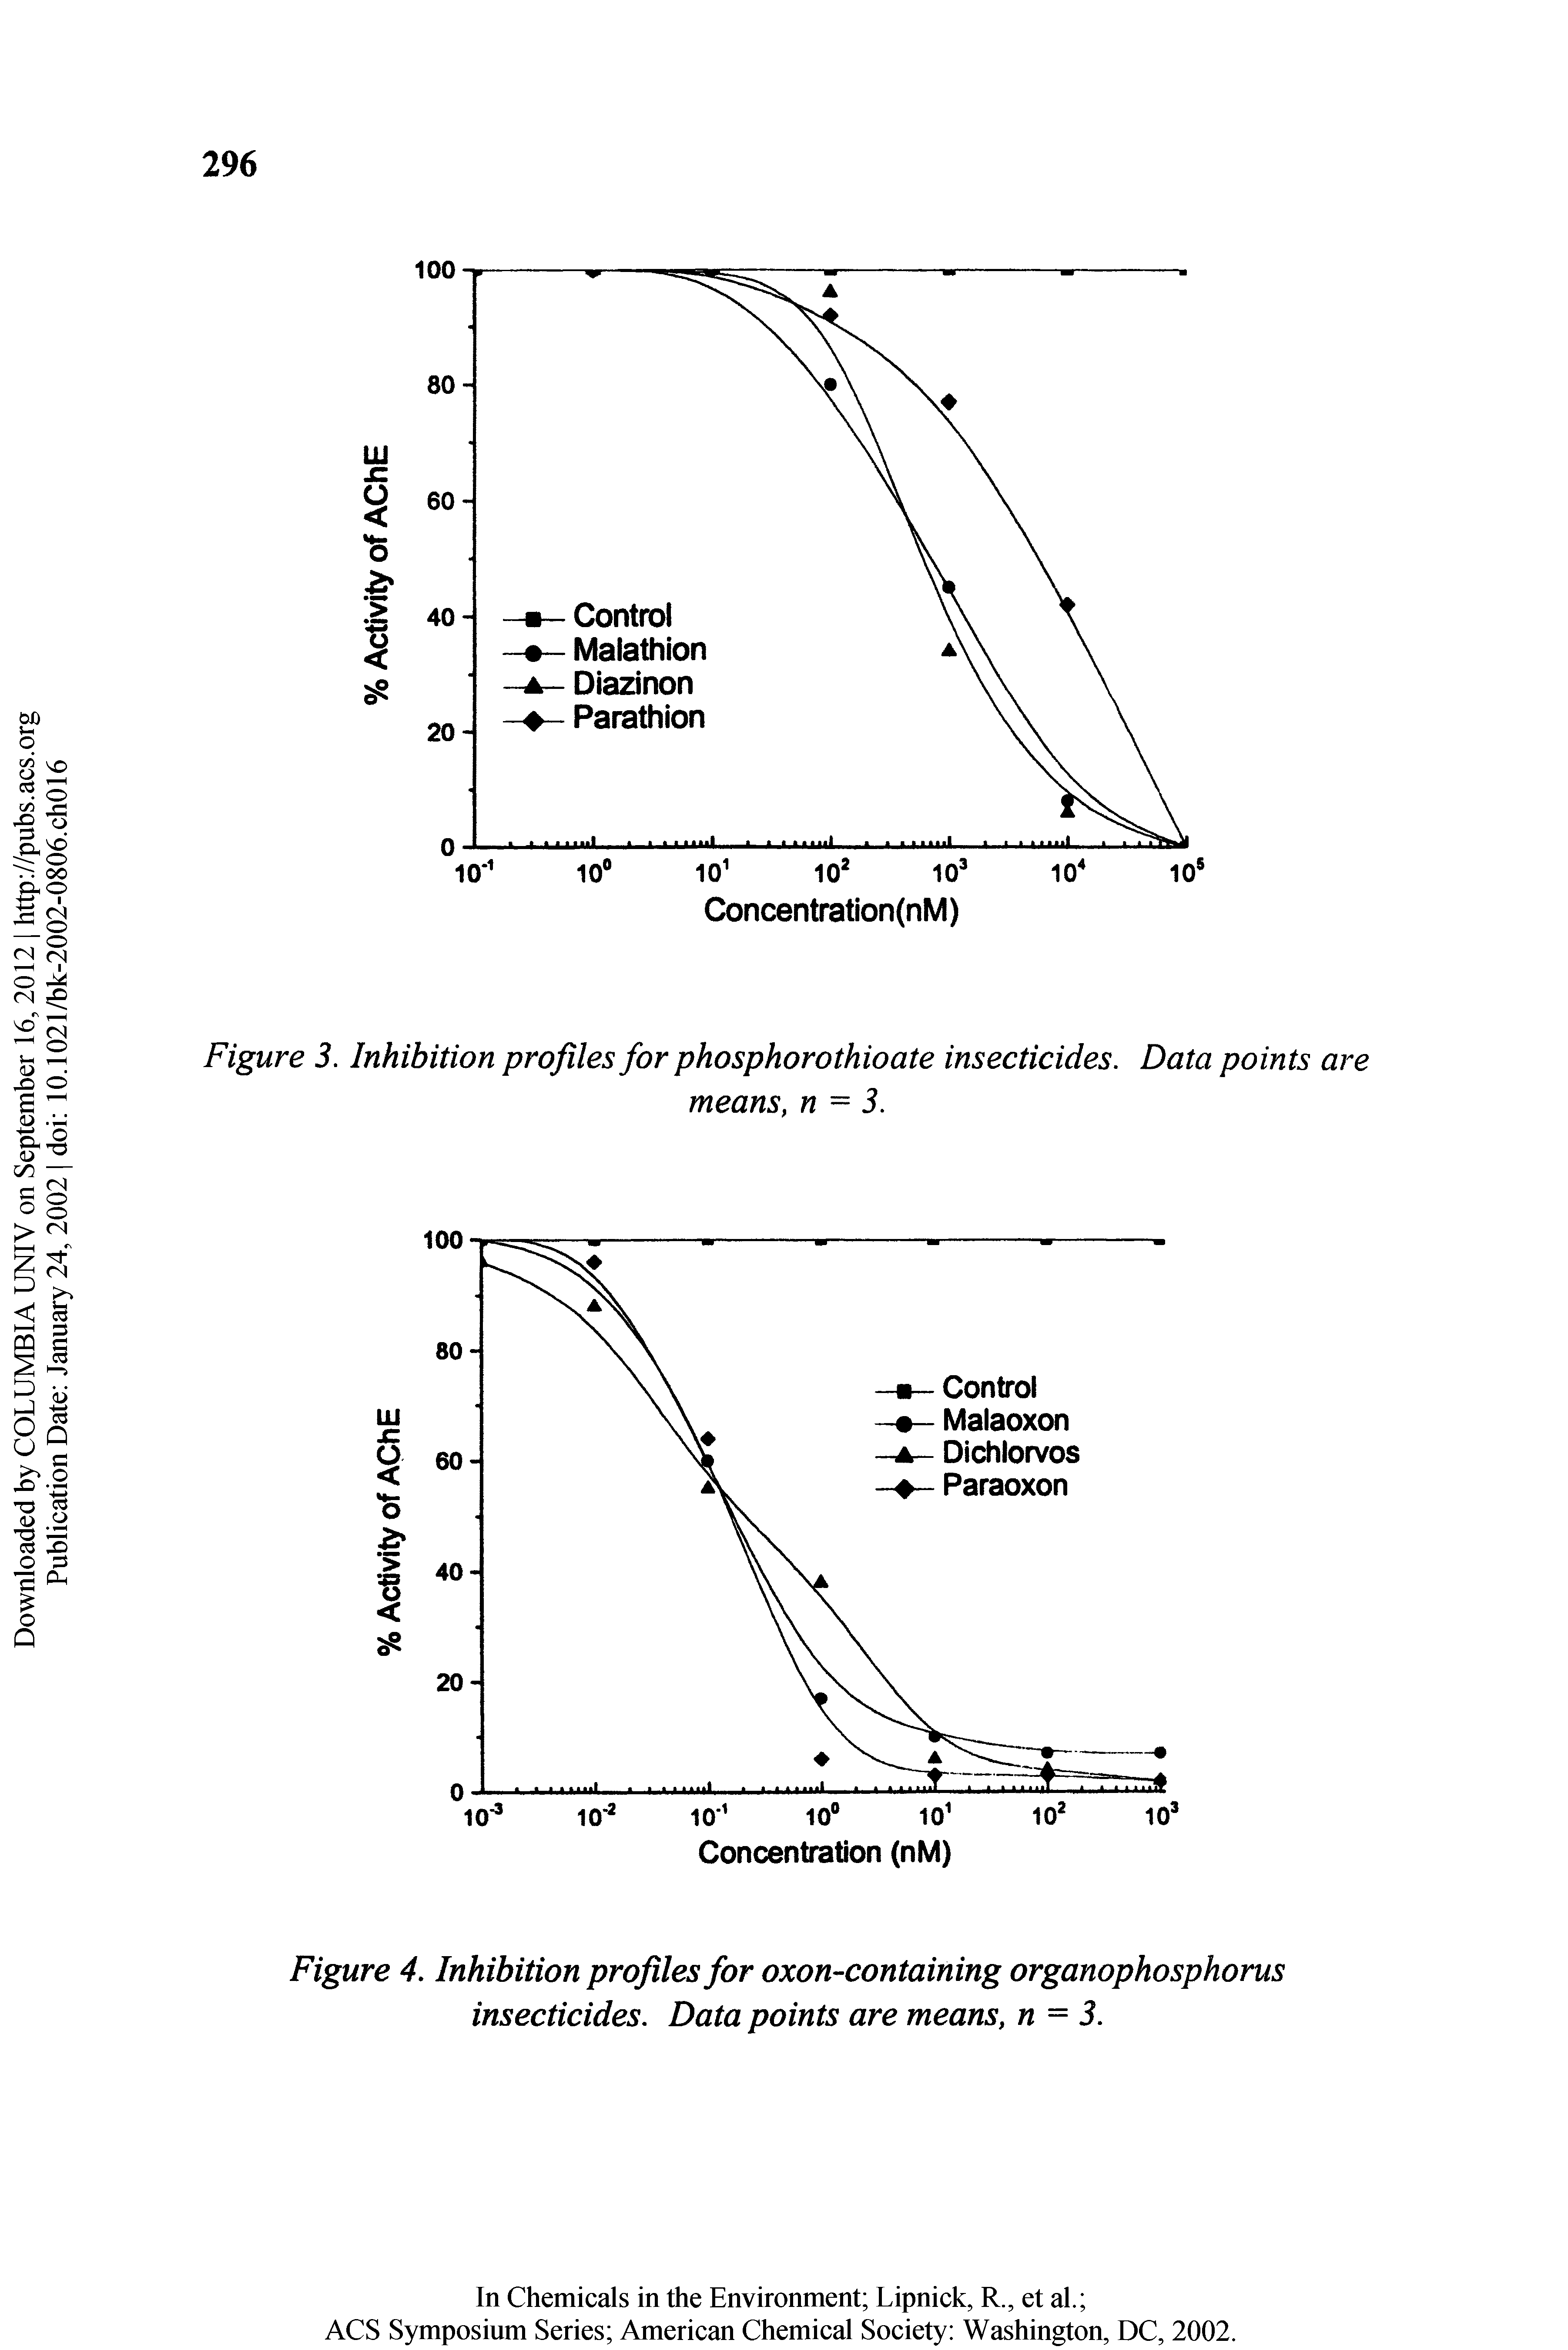 Figure 4. Inhibition profiles for oxon-containing organophosphorus insecticides. Data points are means, n= 3.